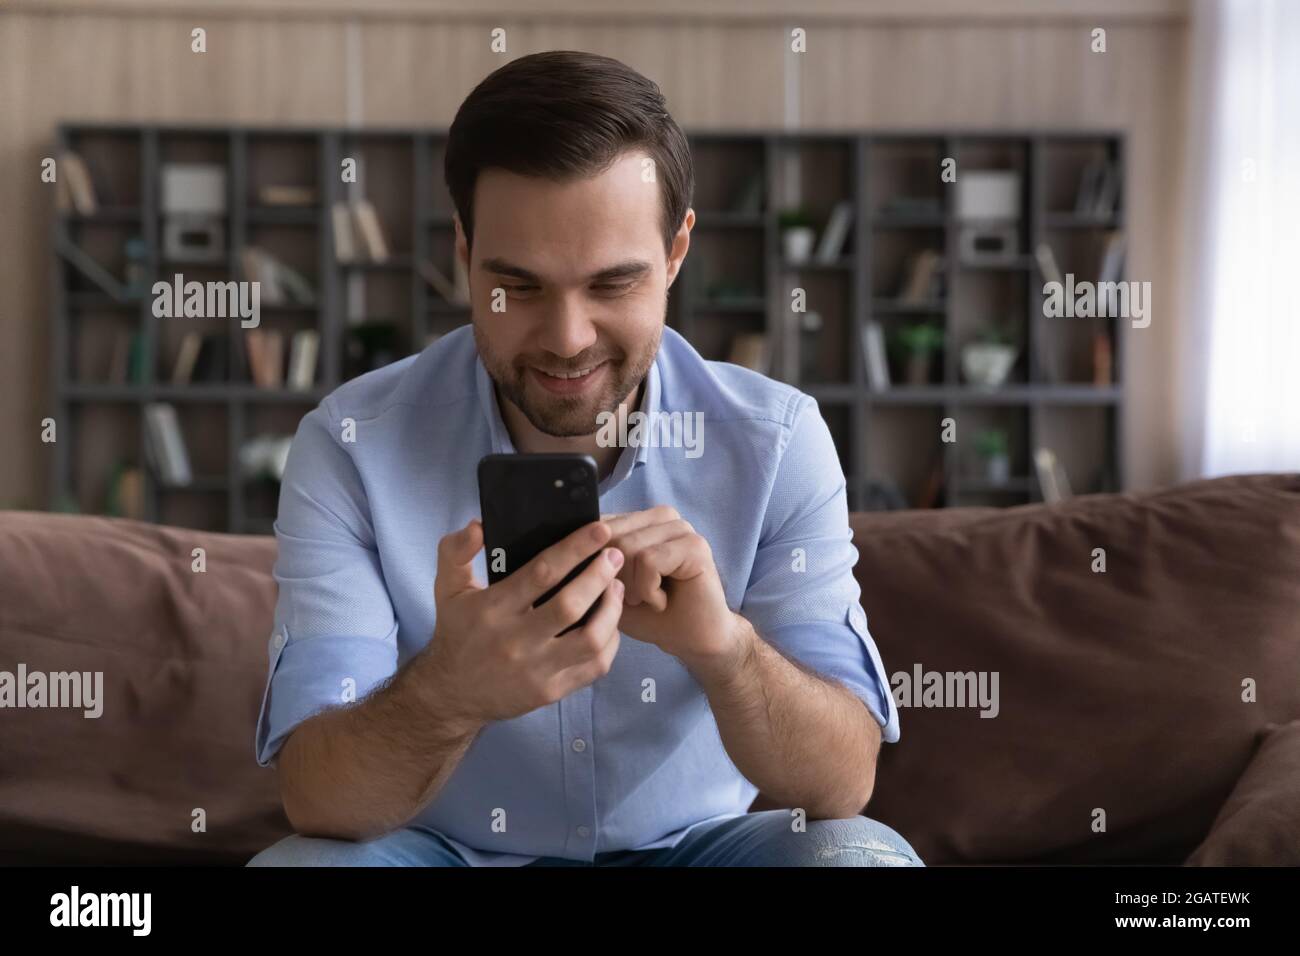 Smiling casual millennial male sit on couch chat on cellphone Stock Photo